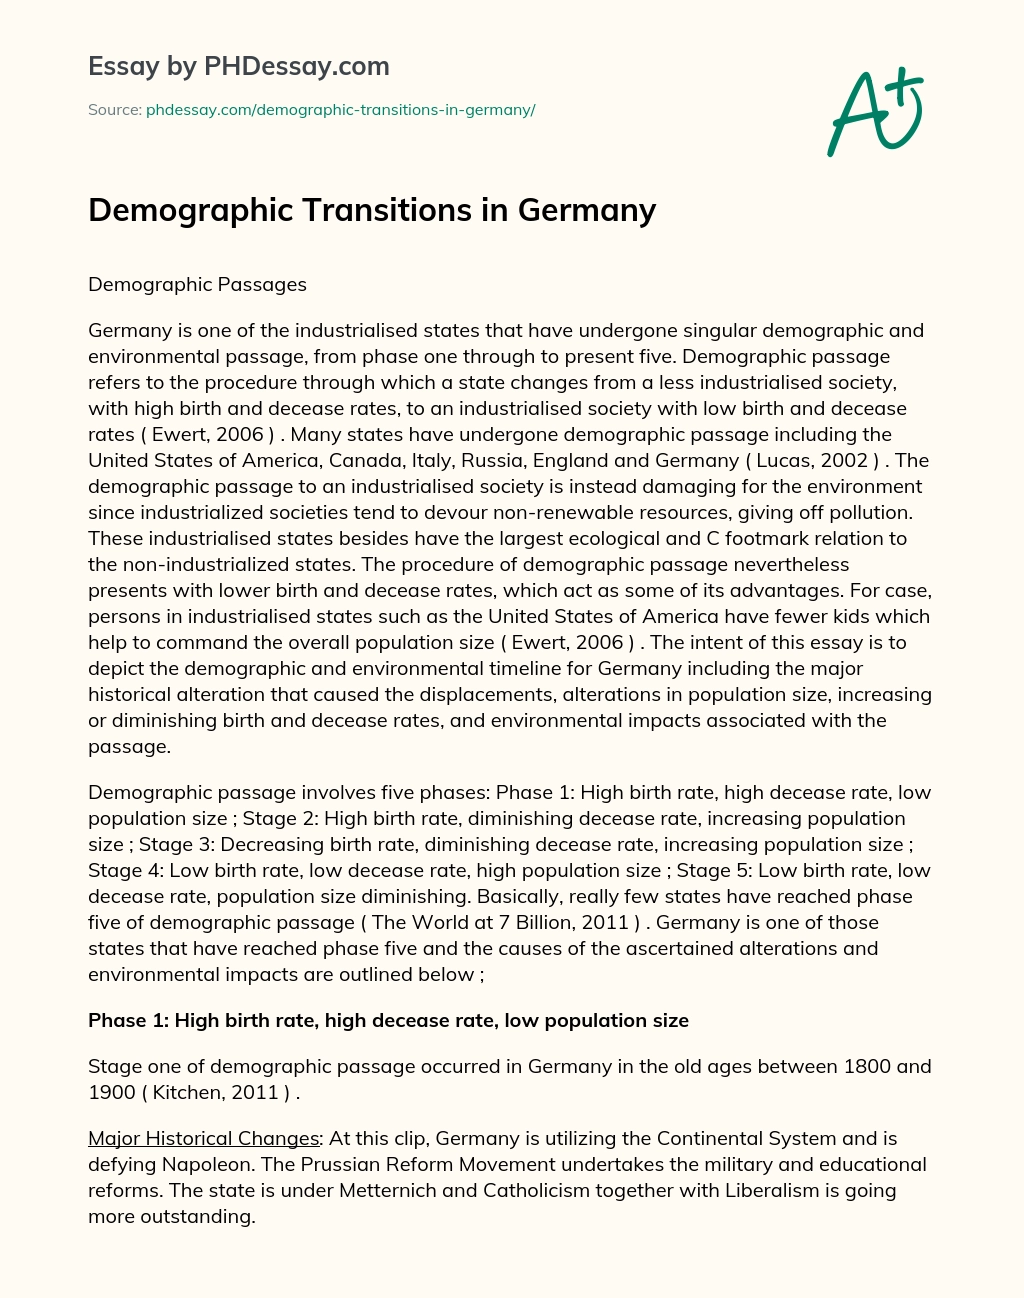 Demographic Transitions in Germany essay